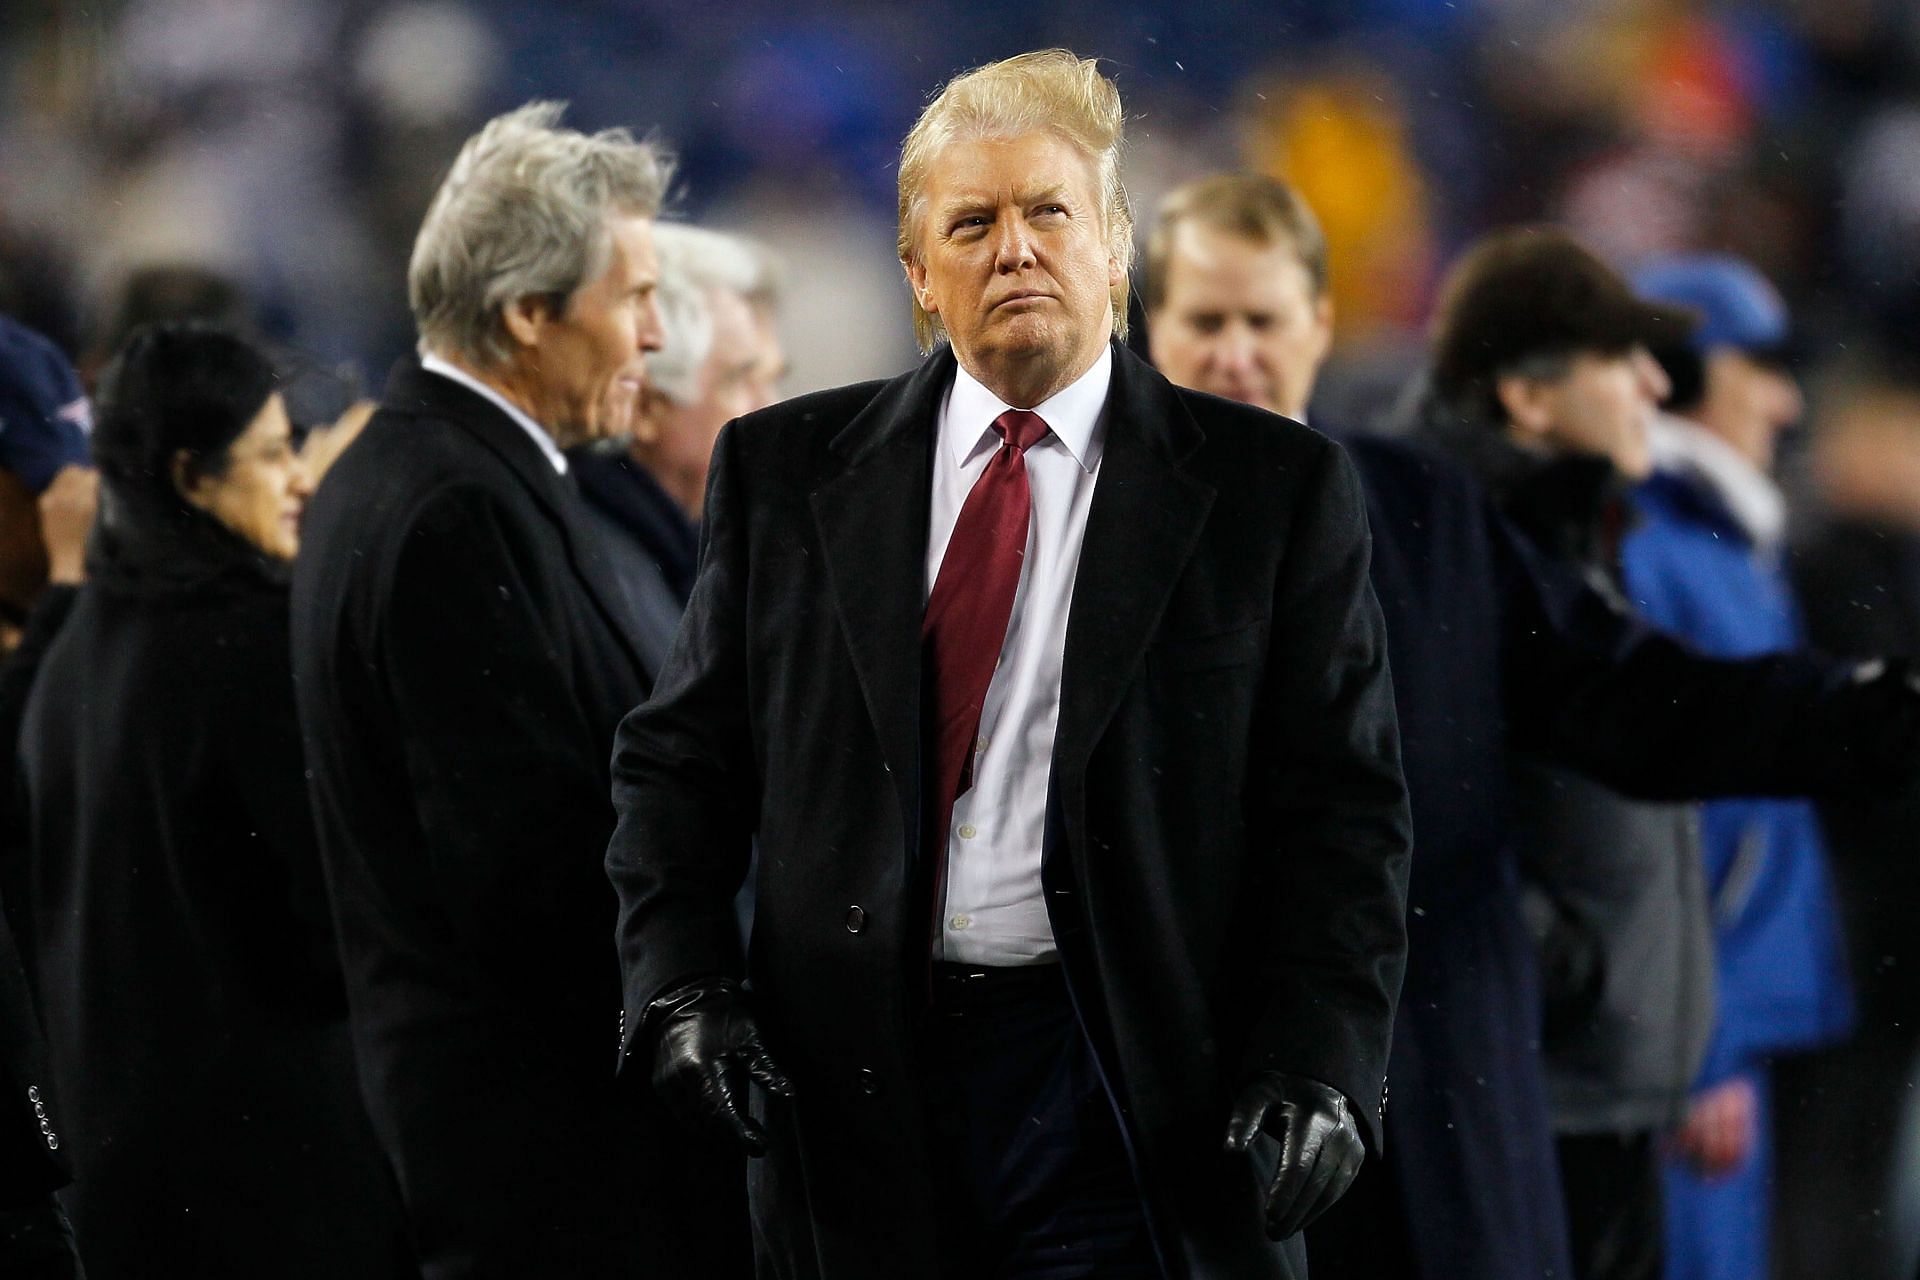 5 NFL owners who support Donald Trump ft. Jerry Jones and Dan Snyder